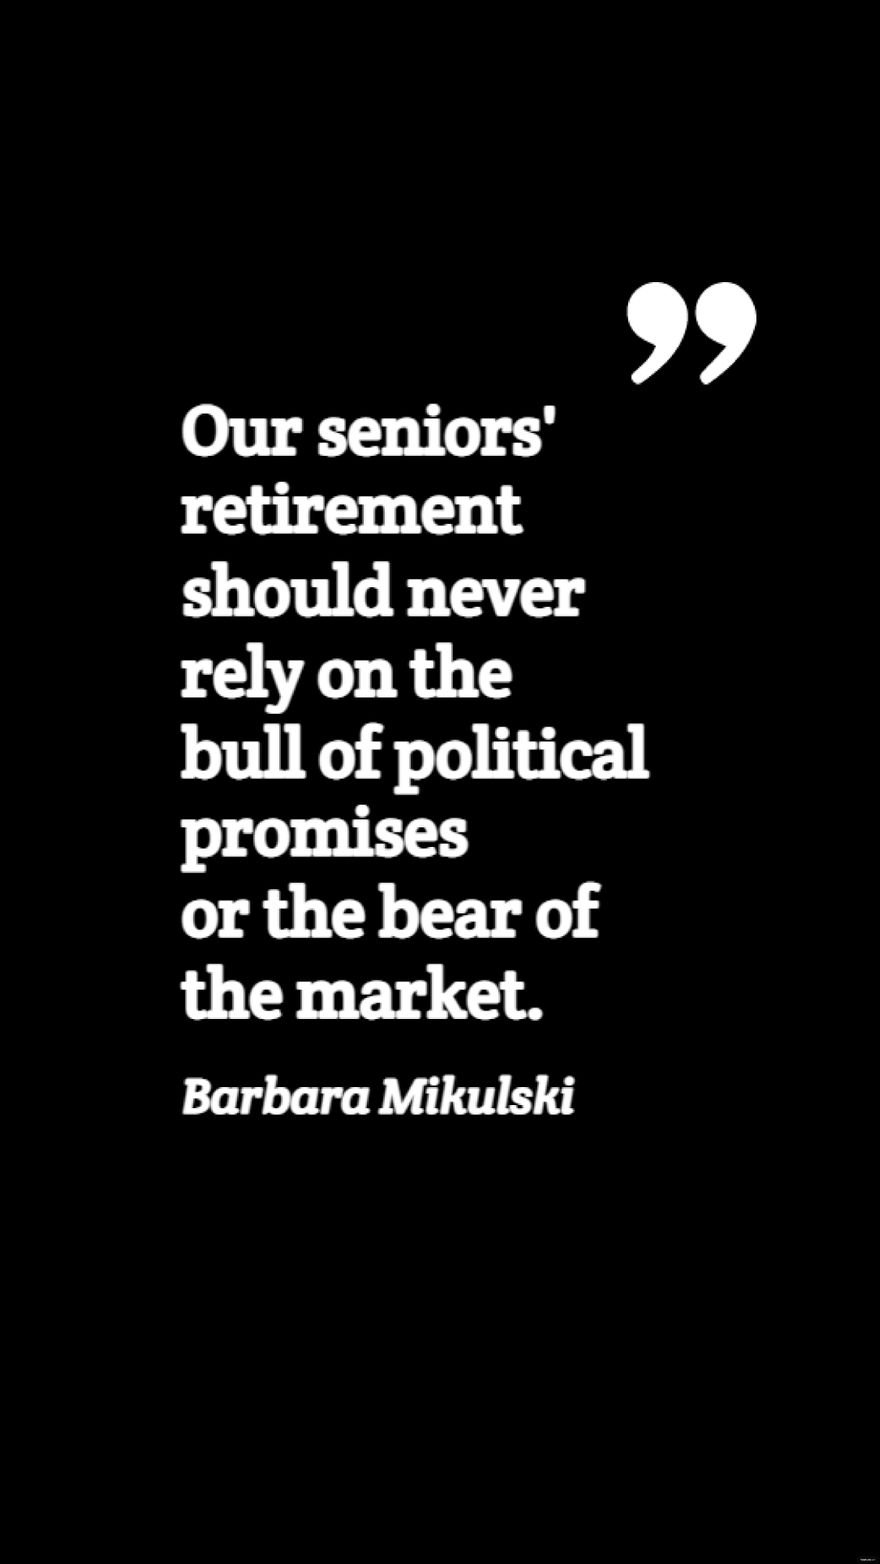 Free Barbara Mikulski - Our seniors' retirement should never rely on the bull of political promises or the bear of the market. in JPG